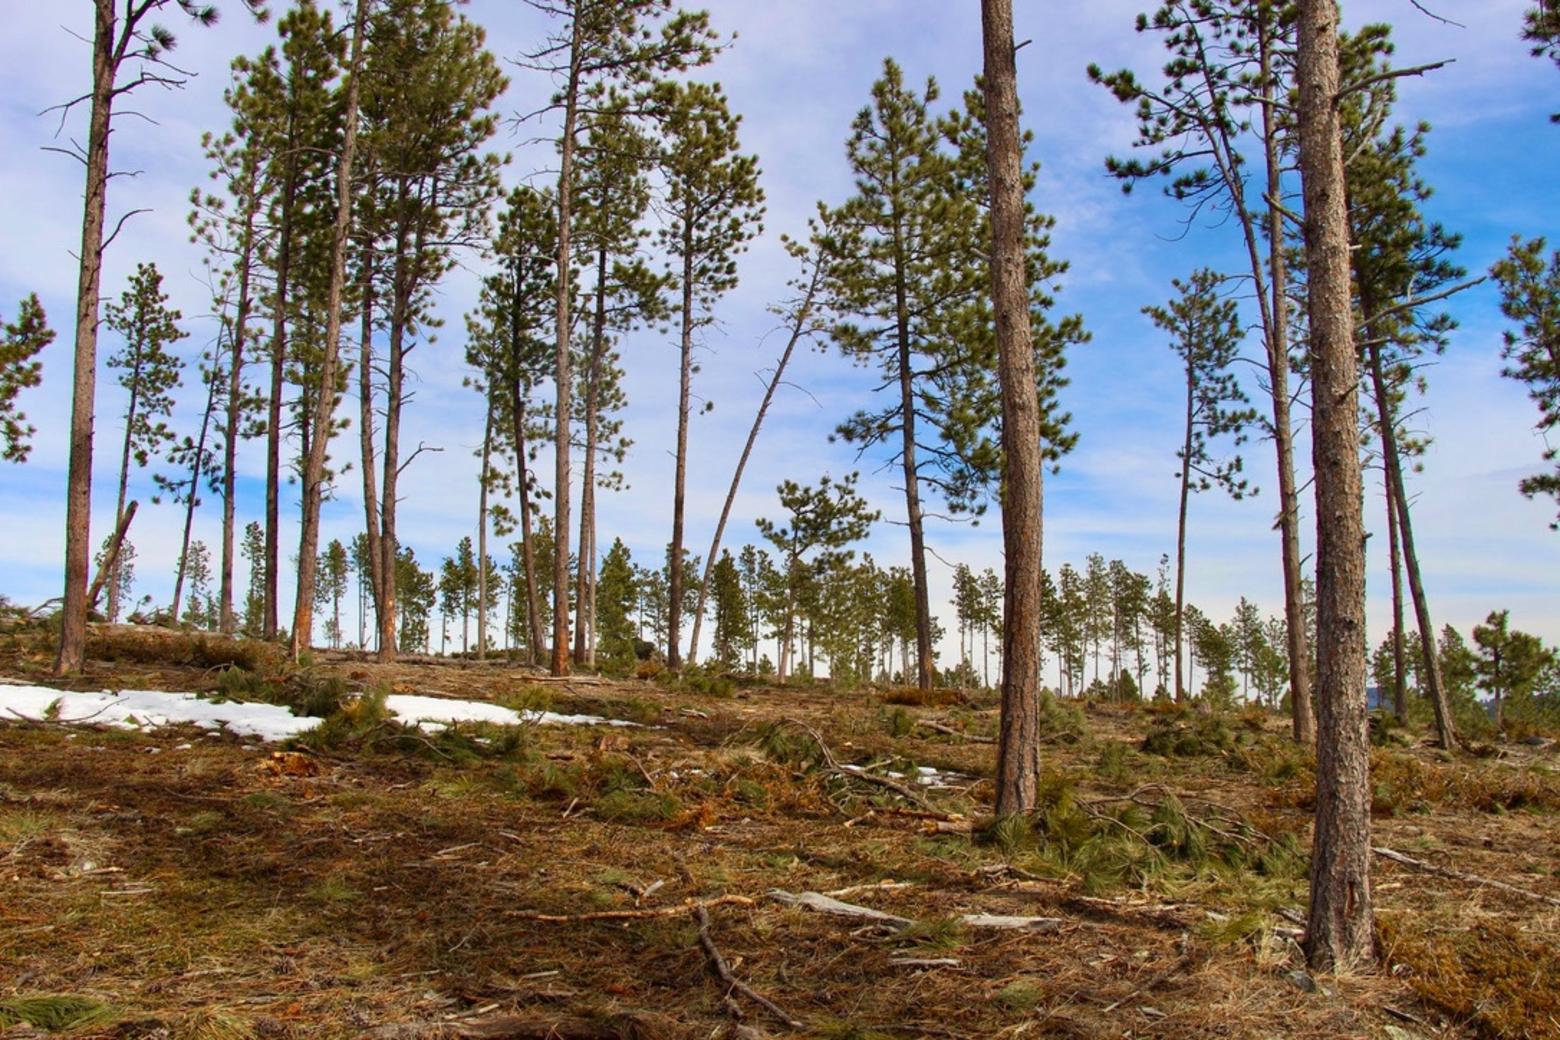 Thinning the forest to "save" it from fire, beetles and climate change? For years, forestry projects on the Black Hills and on other national forests in the West focused on removing old trees which have negative ecological impacts and may actually hamper the ability of forests to be more resilient, Furnish says. Photo courtesy Norbeck Society